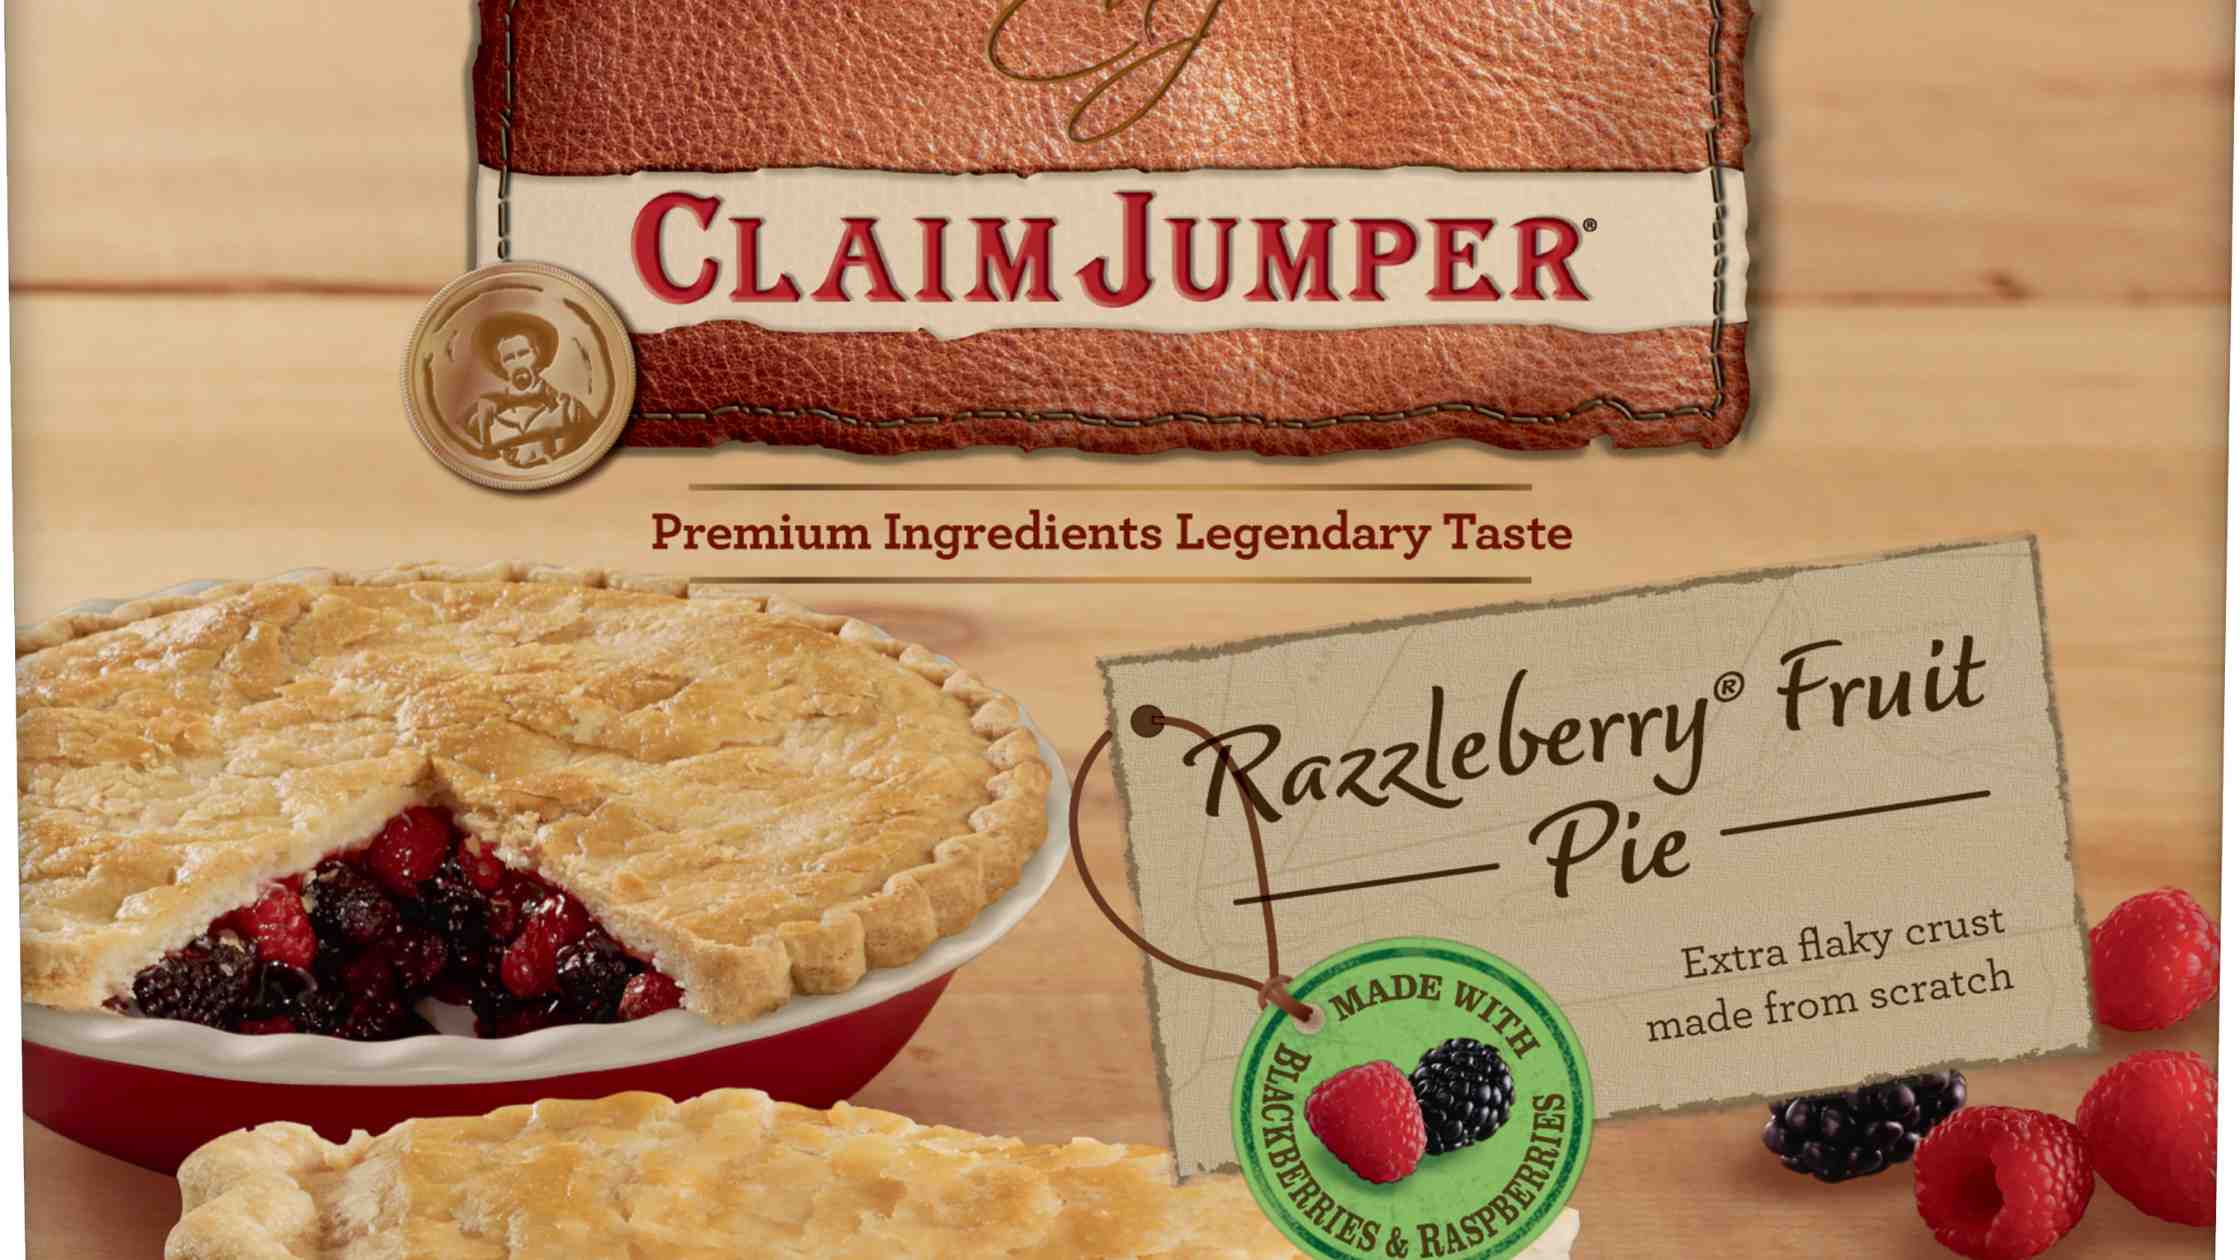 Claim Jumper Pies Discontinued - Do They Still Make it?